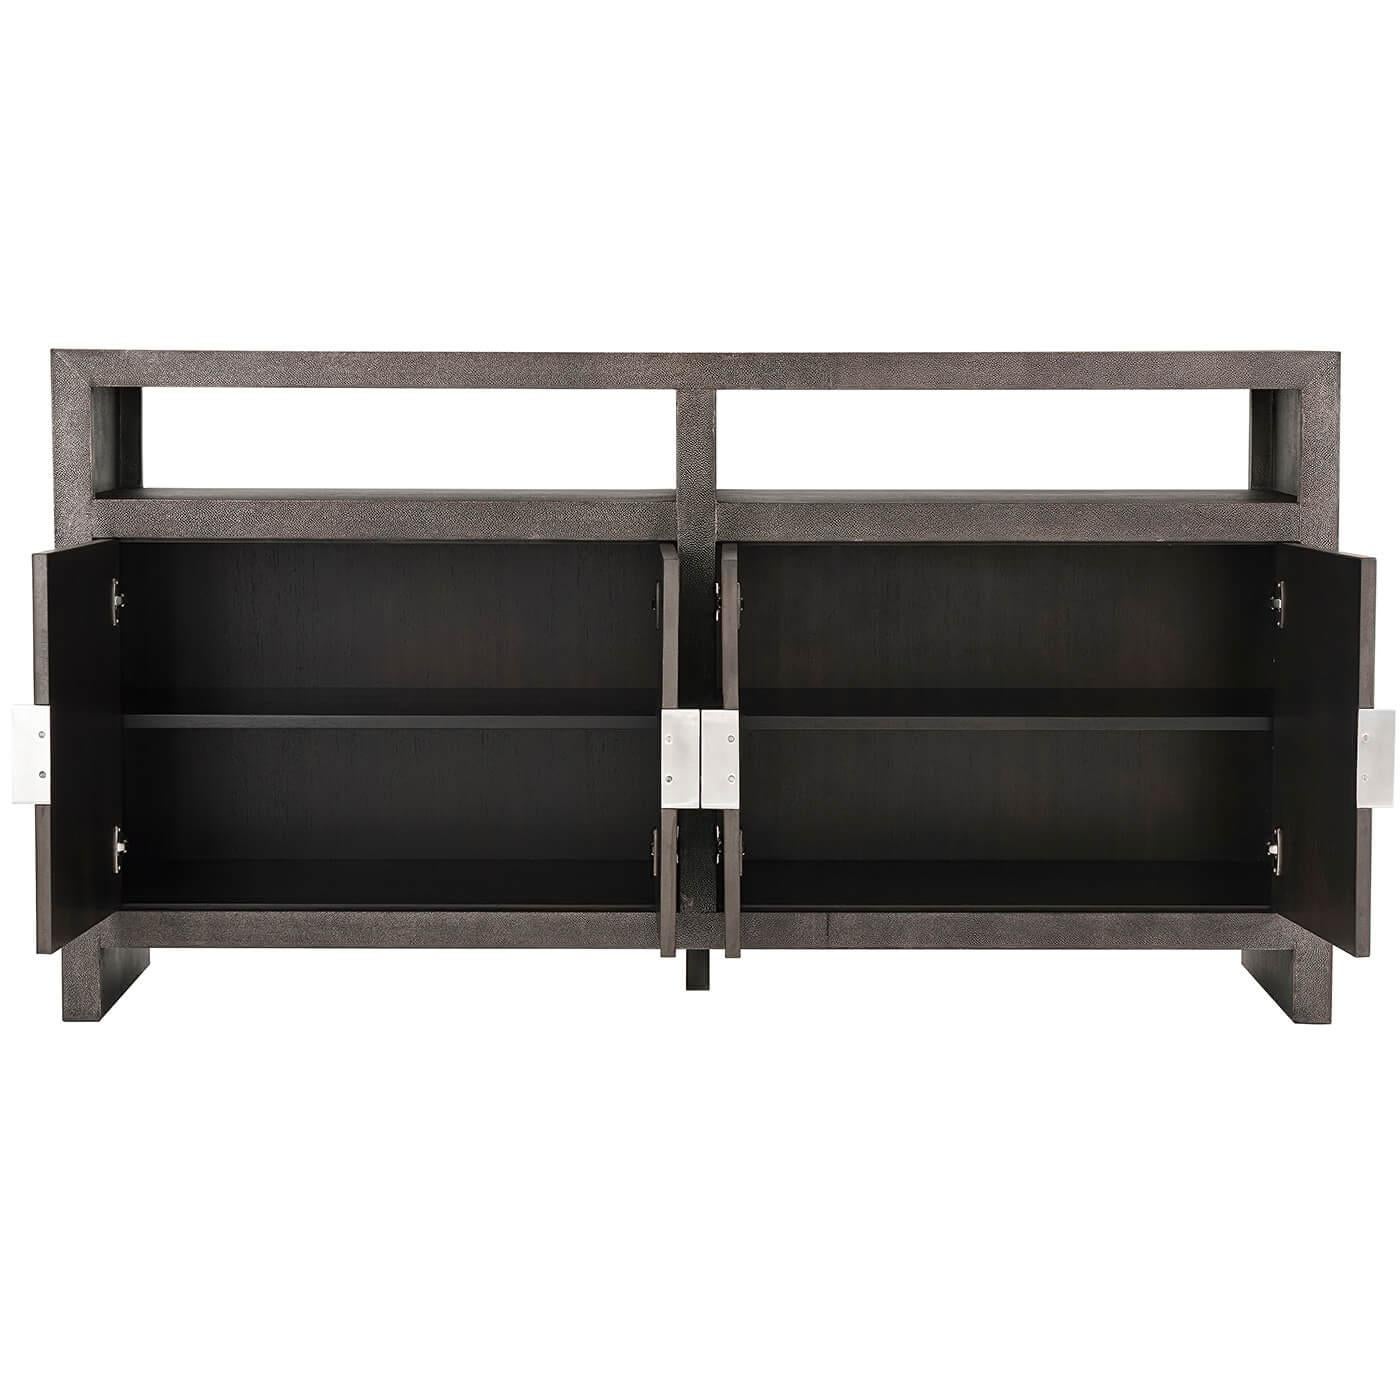 Modern shagreen embossed leather-wrapped buffet with our dark tempest finish leather with a rectangular top with two open shelves and four cabinet doors with inlaid metal handles.
Dimensions: 68